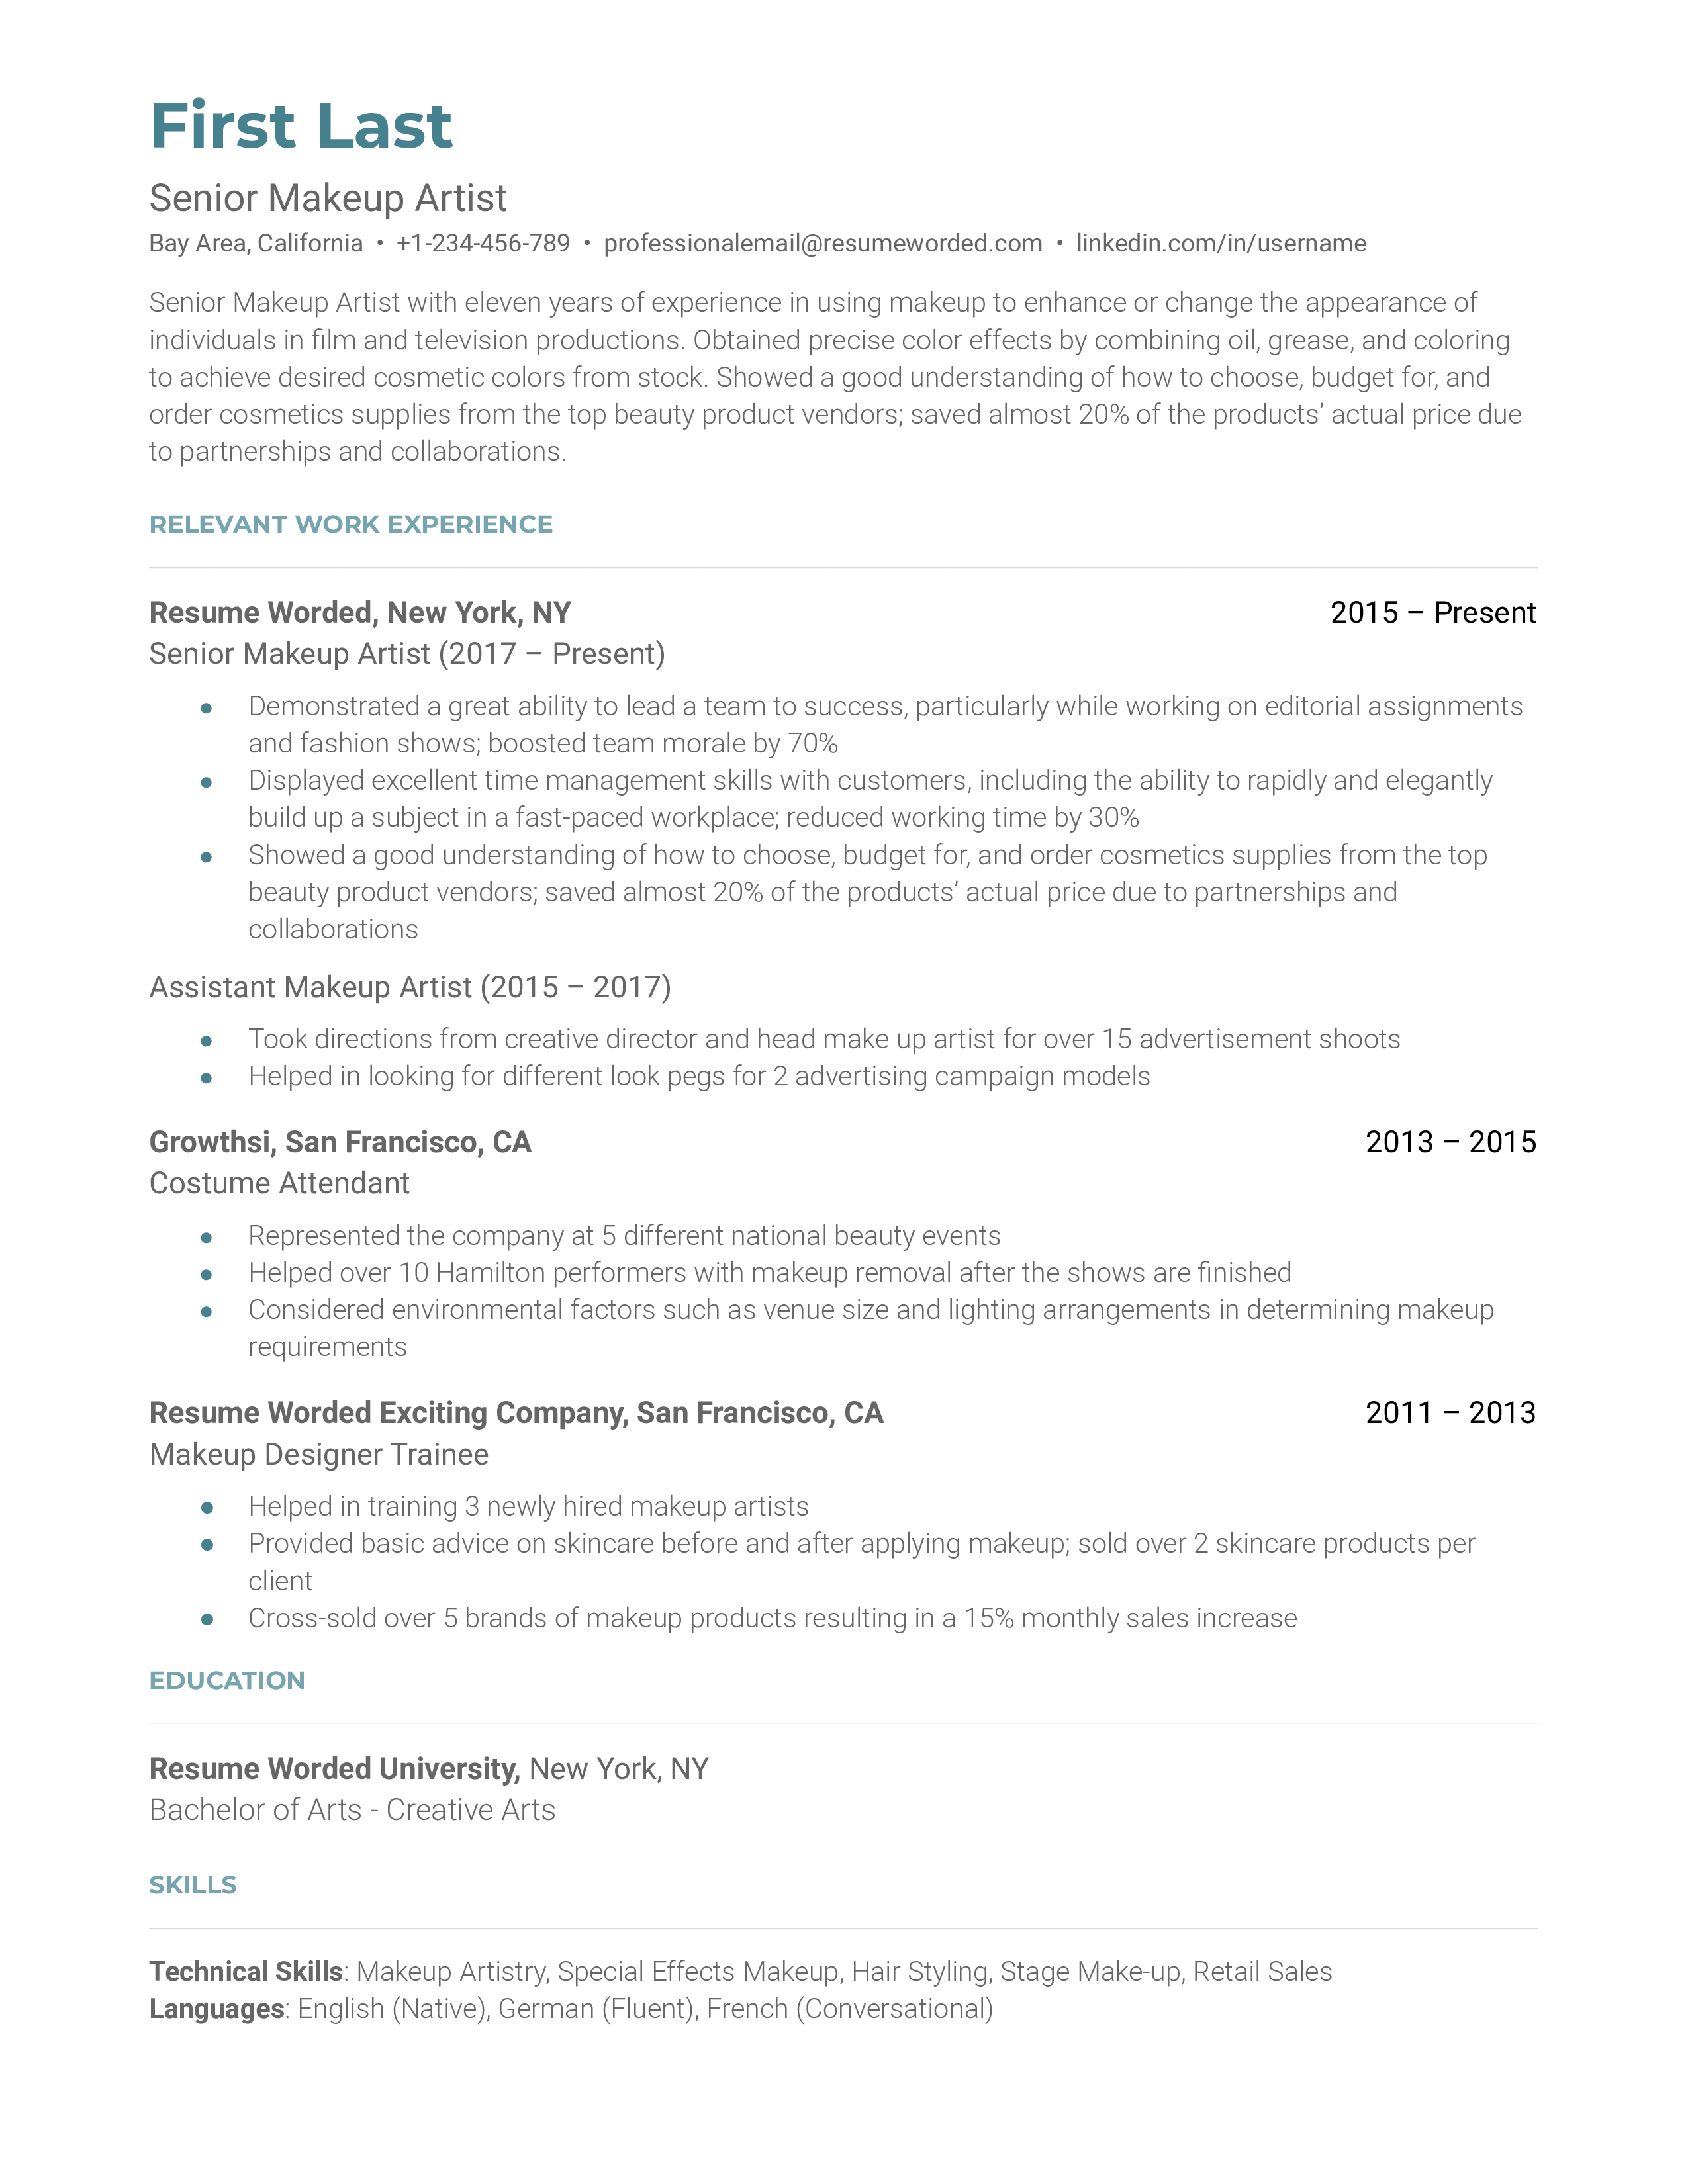 A well-structured CV detailing the qualifications and experience of a Senior Makeup Artist.